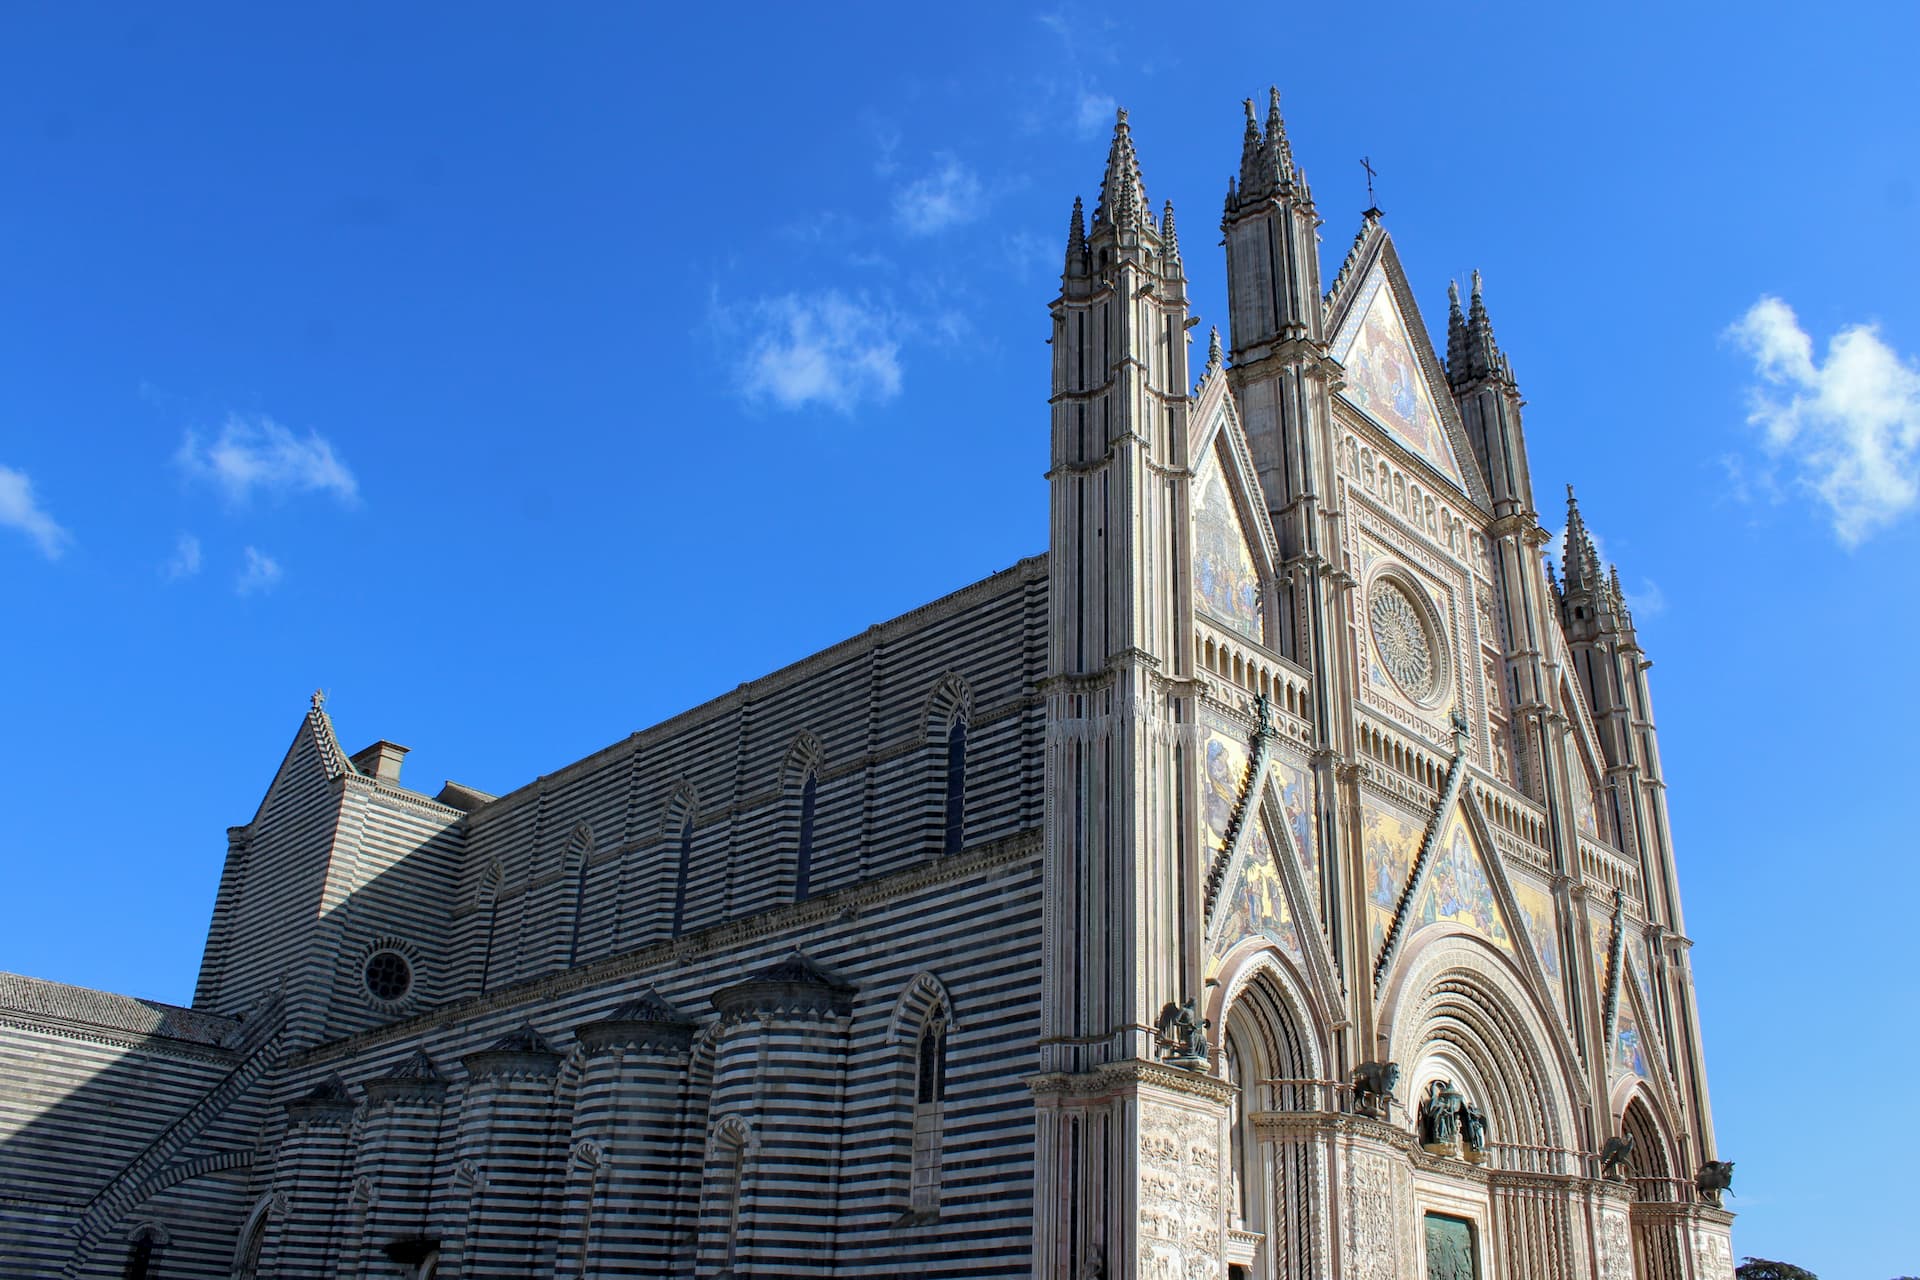 large cathedral with horizontally striped sides and a front facade ornately decorated.